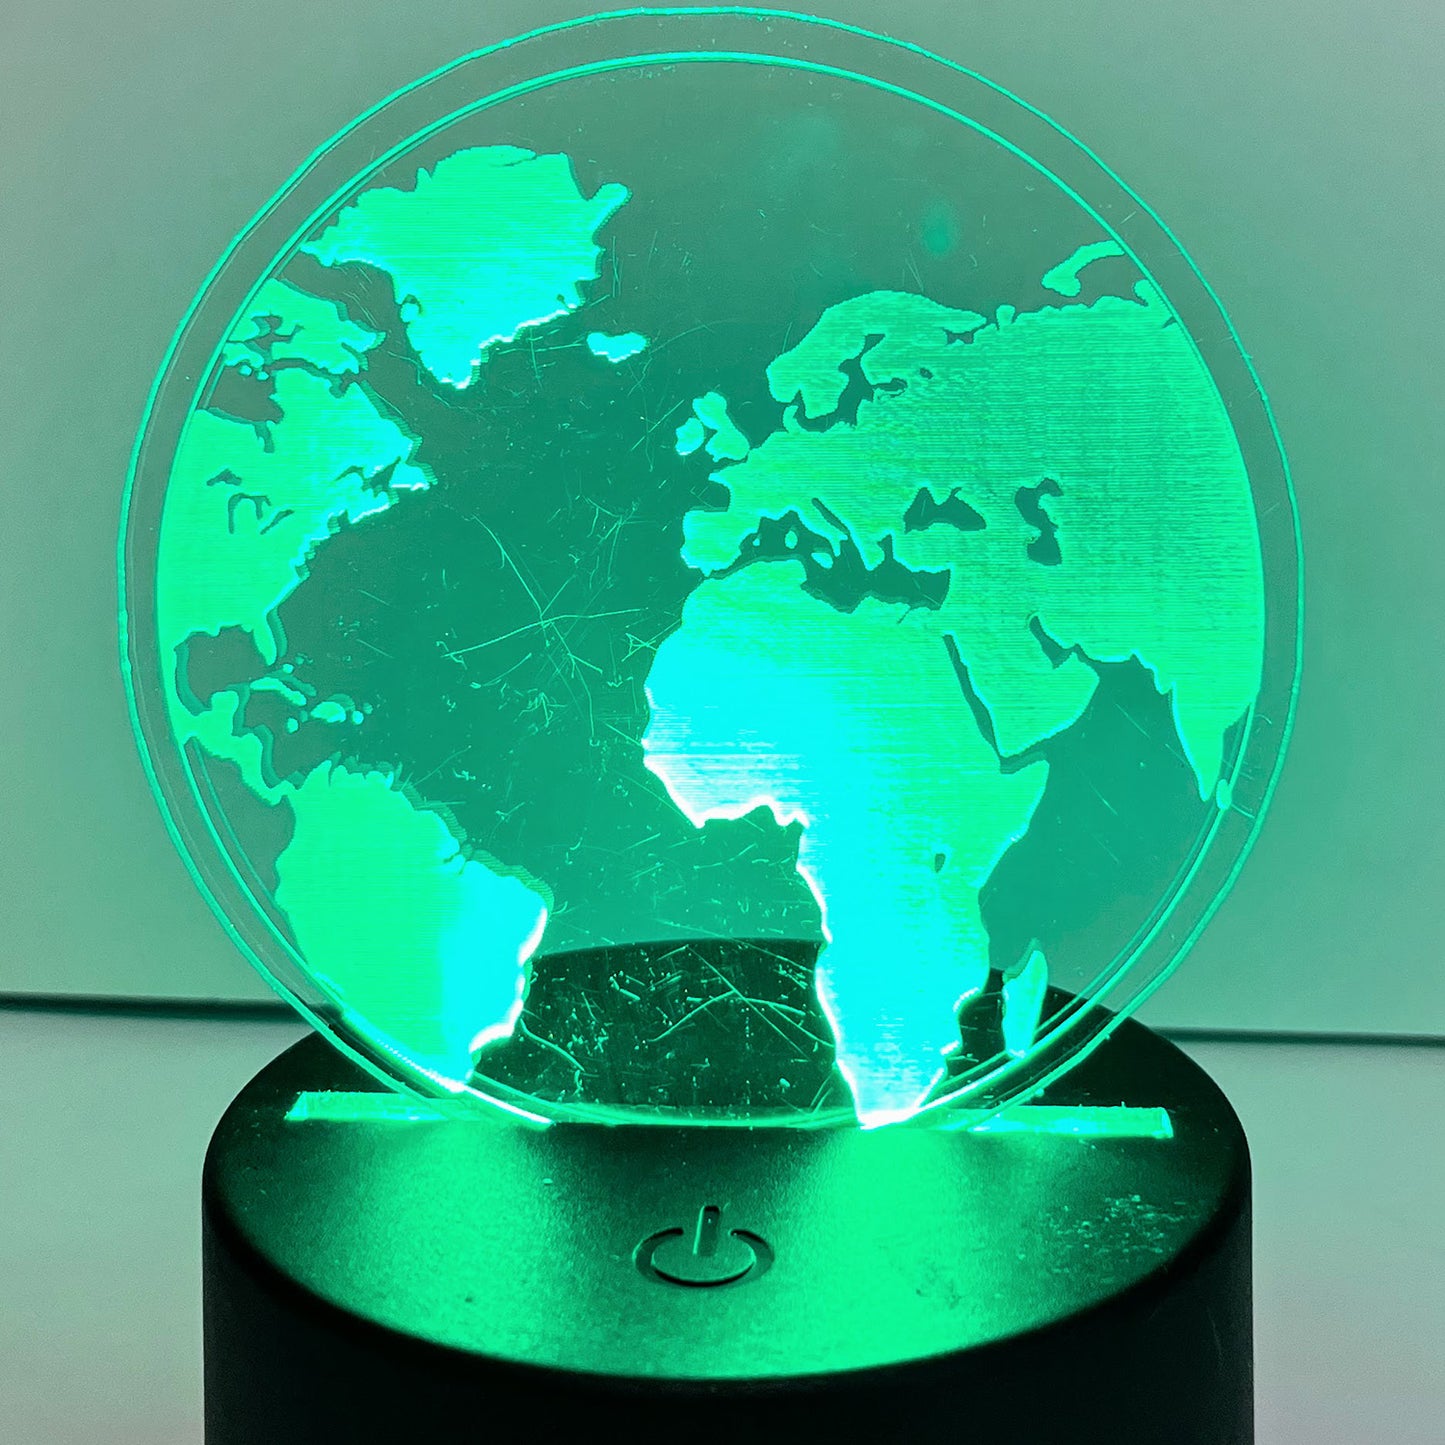 The Celestial Bodies "Planet Earth" LED Nightlight Inserts